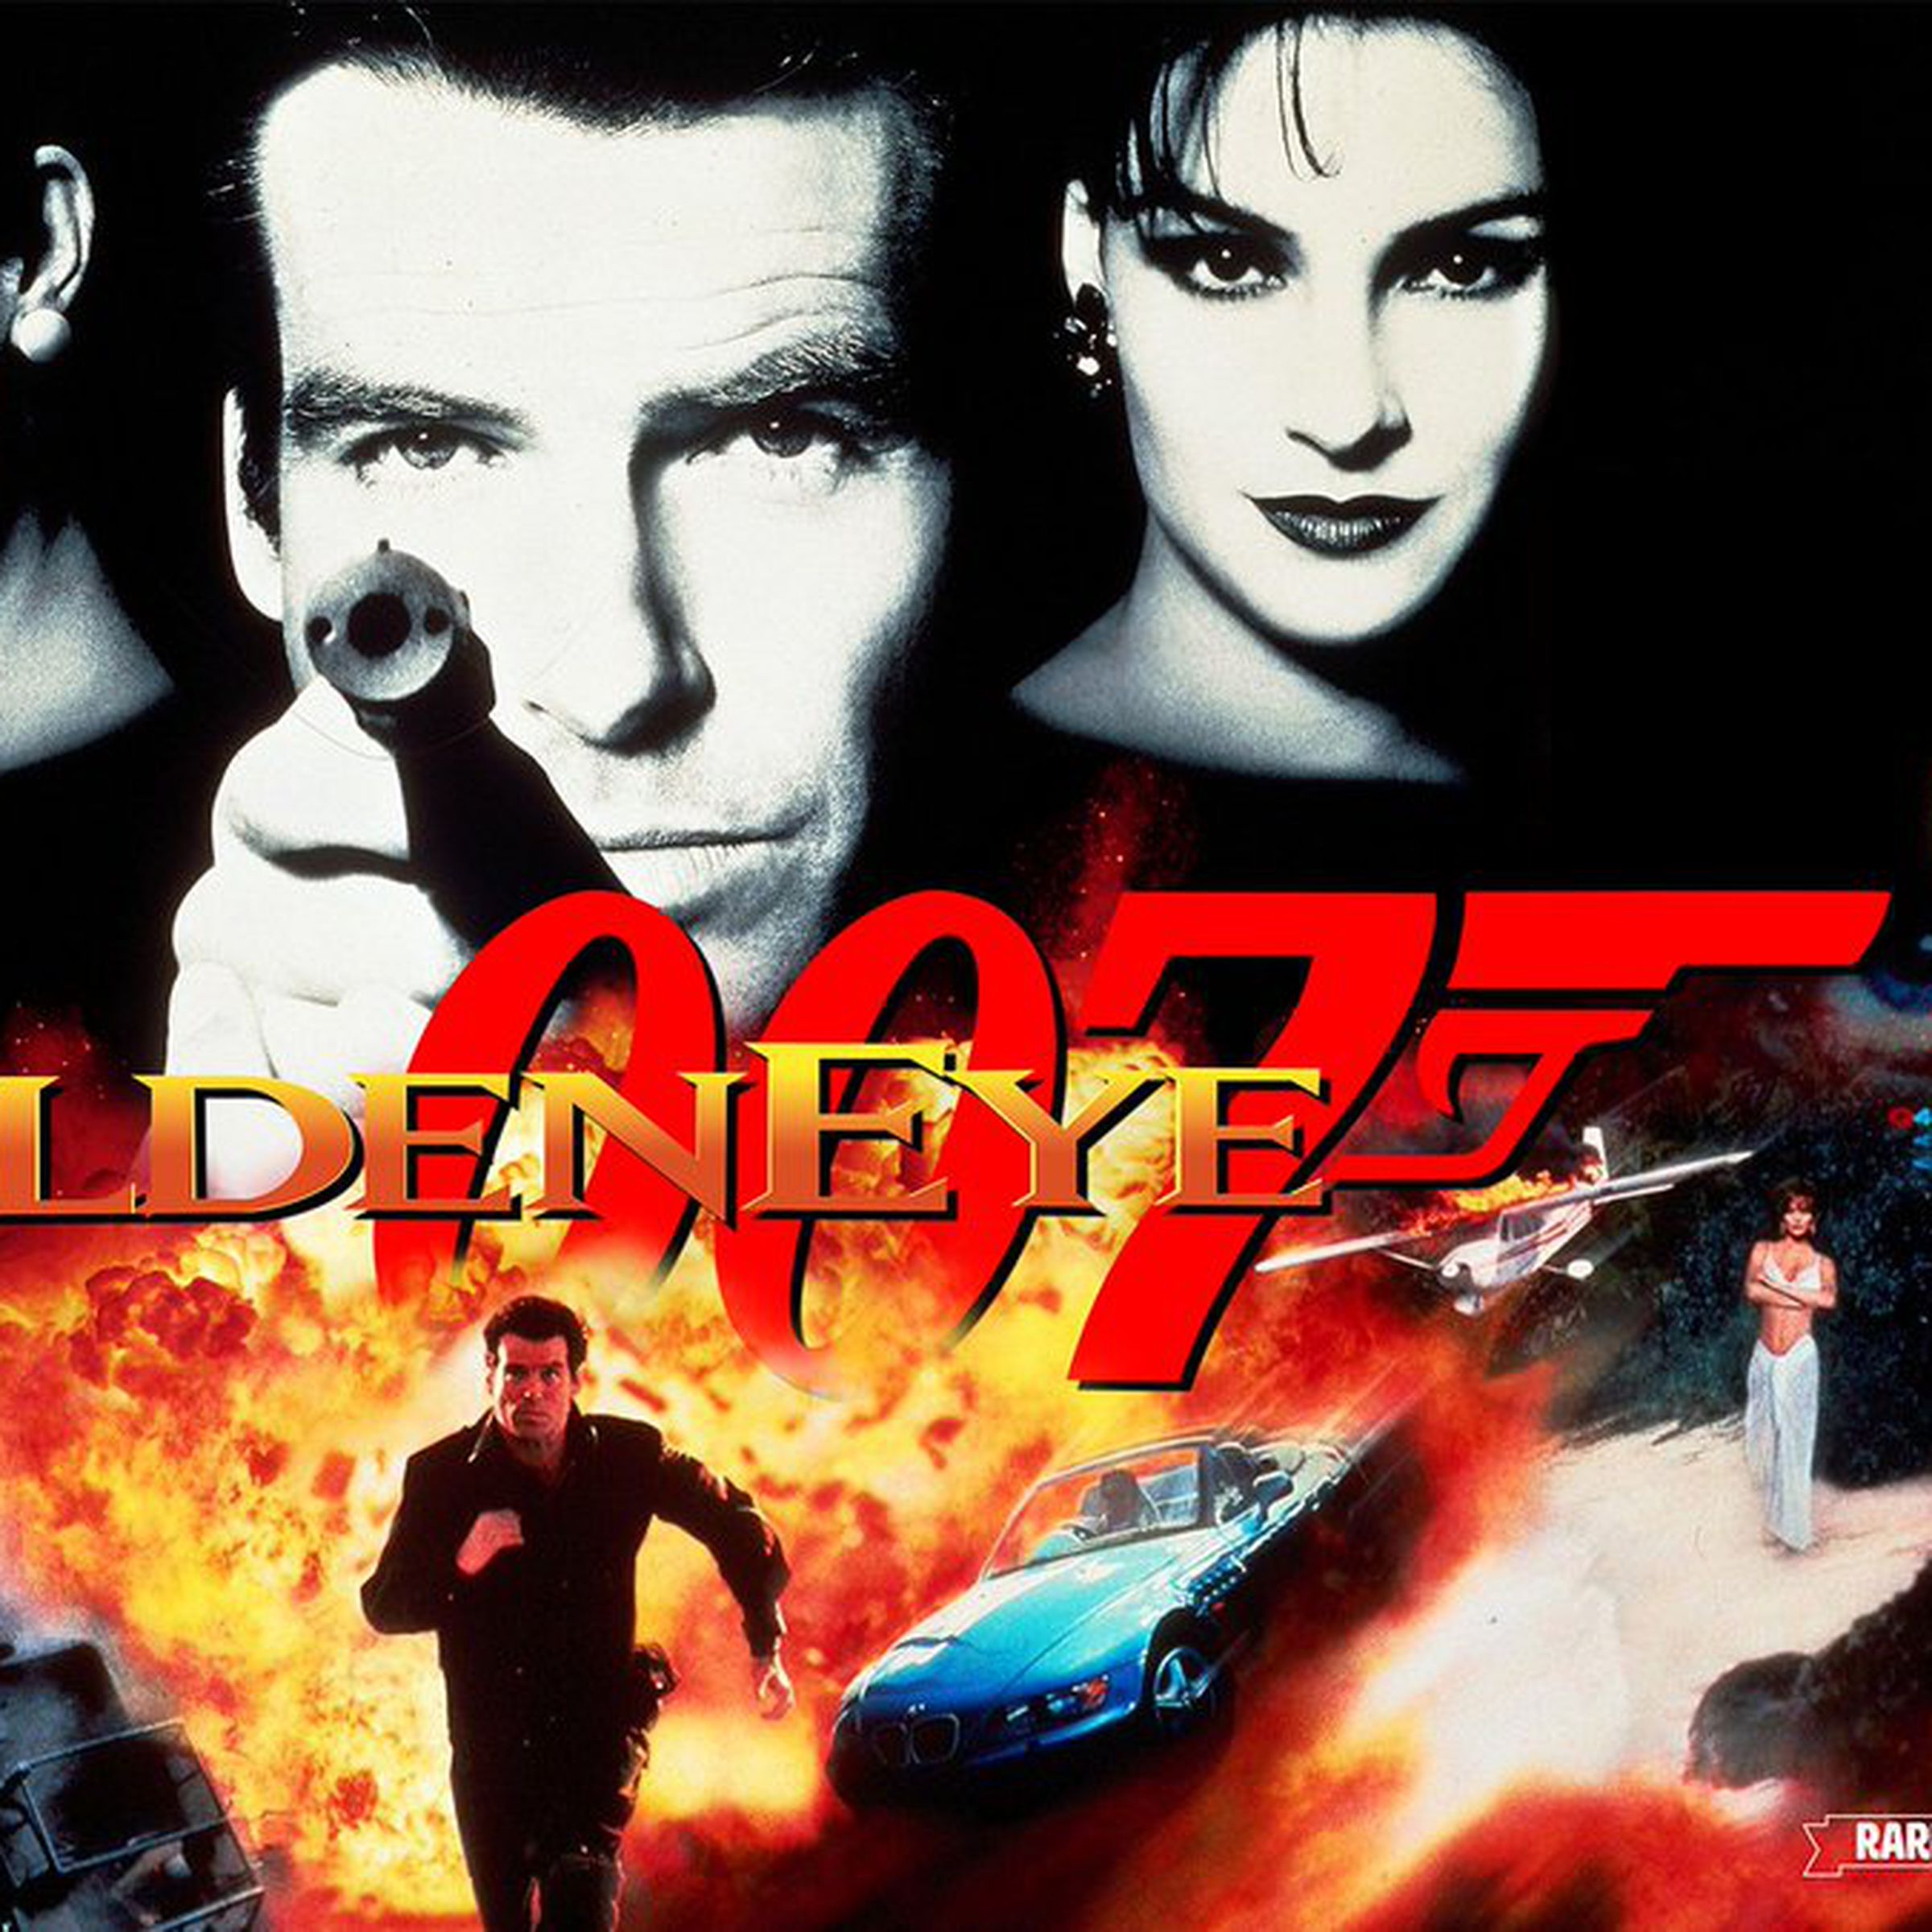 GoldenEye returns to consoles after 25 years